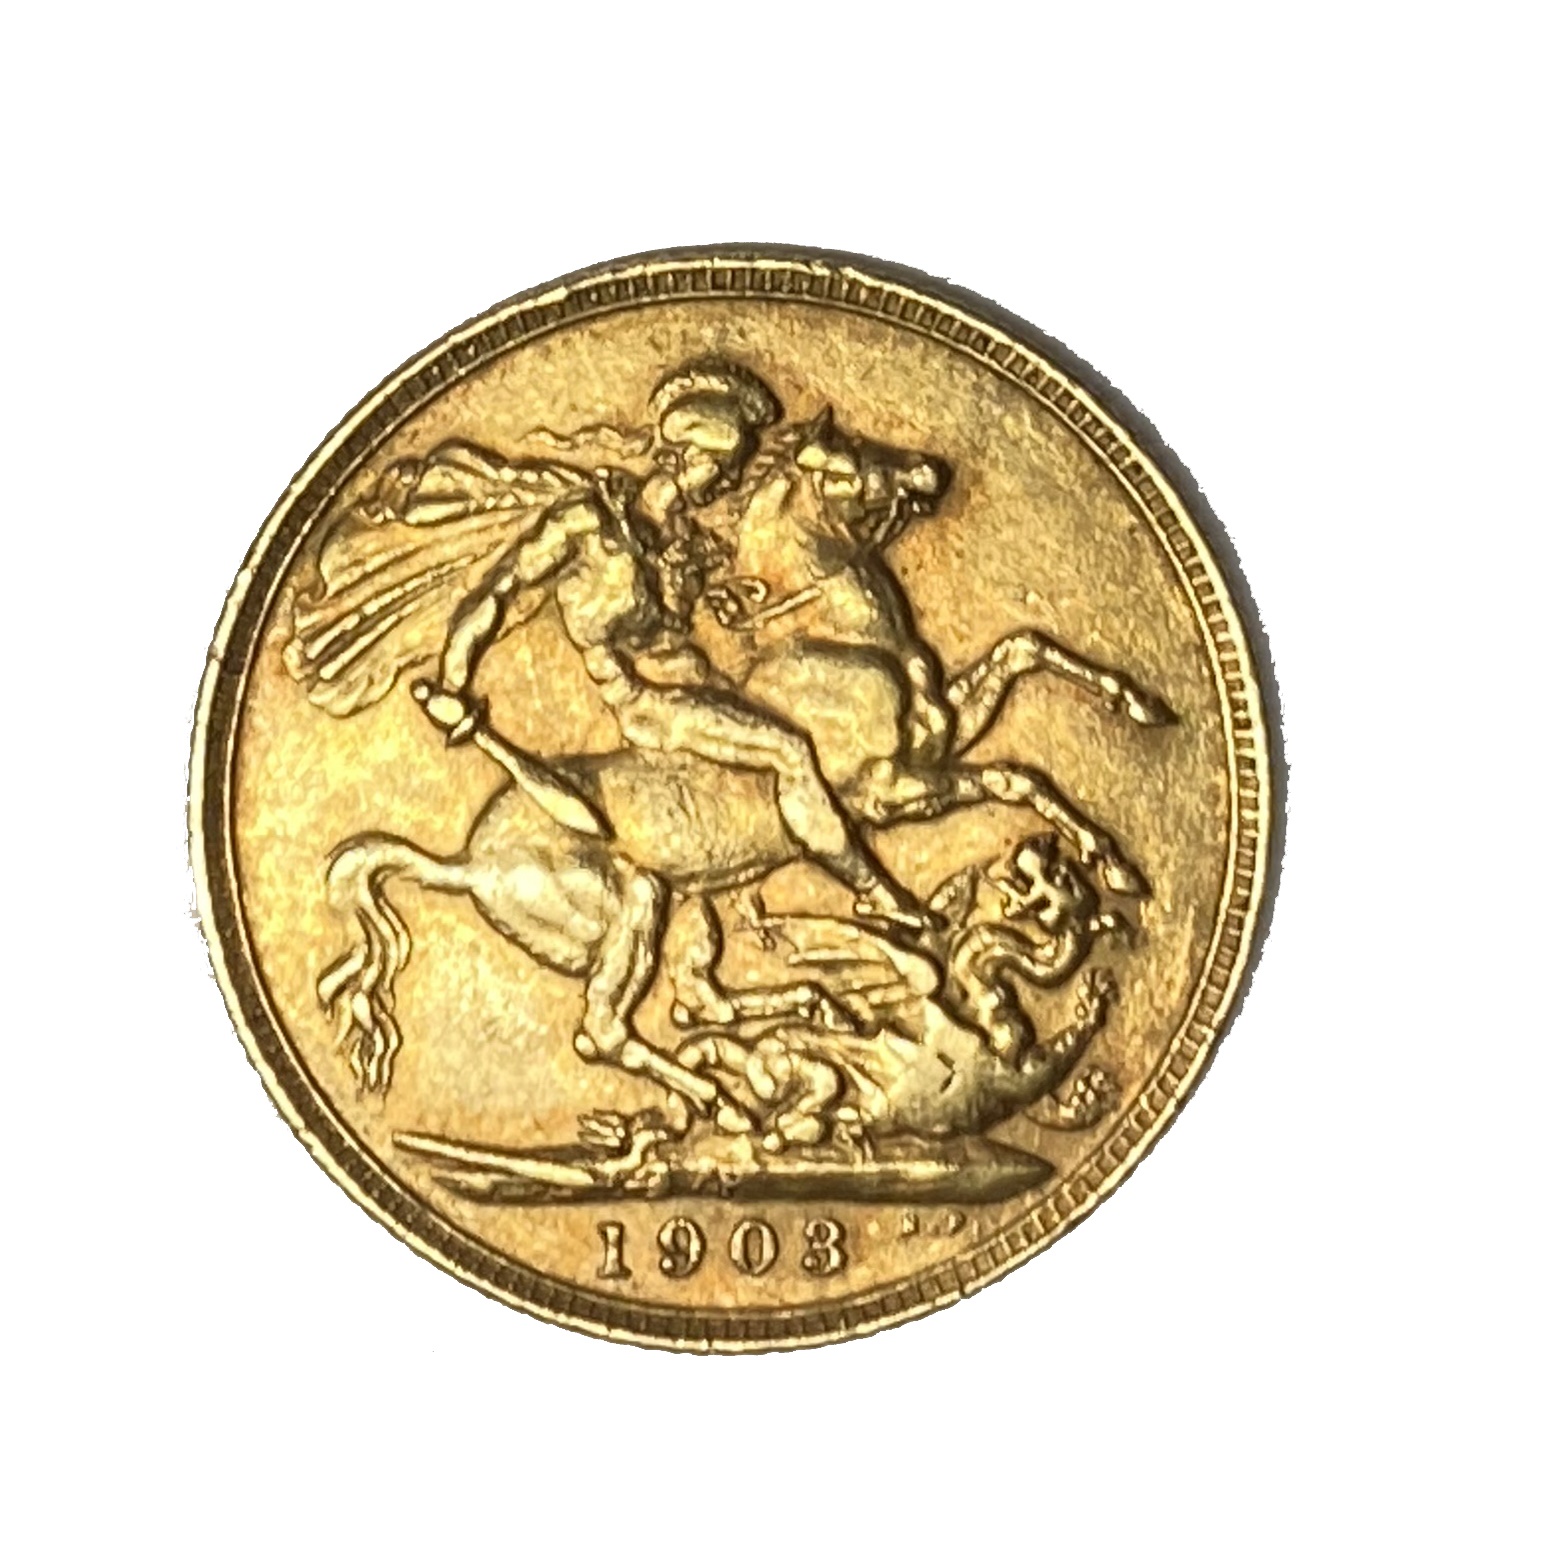 Edward VII gold Sovereign coin, 1903, Perth mint - Image 2 of 2